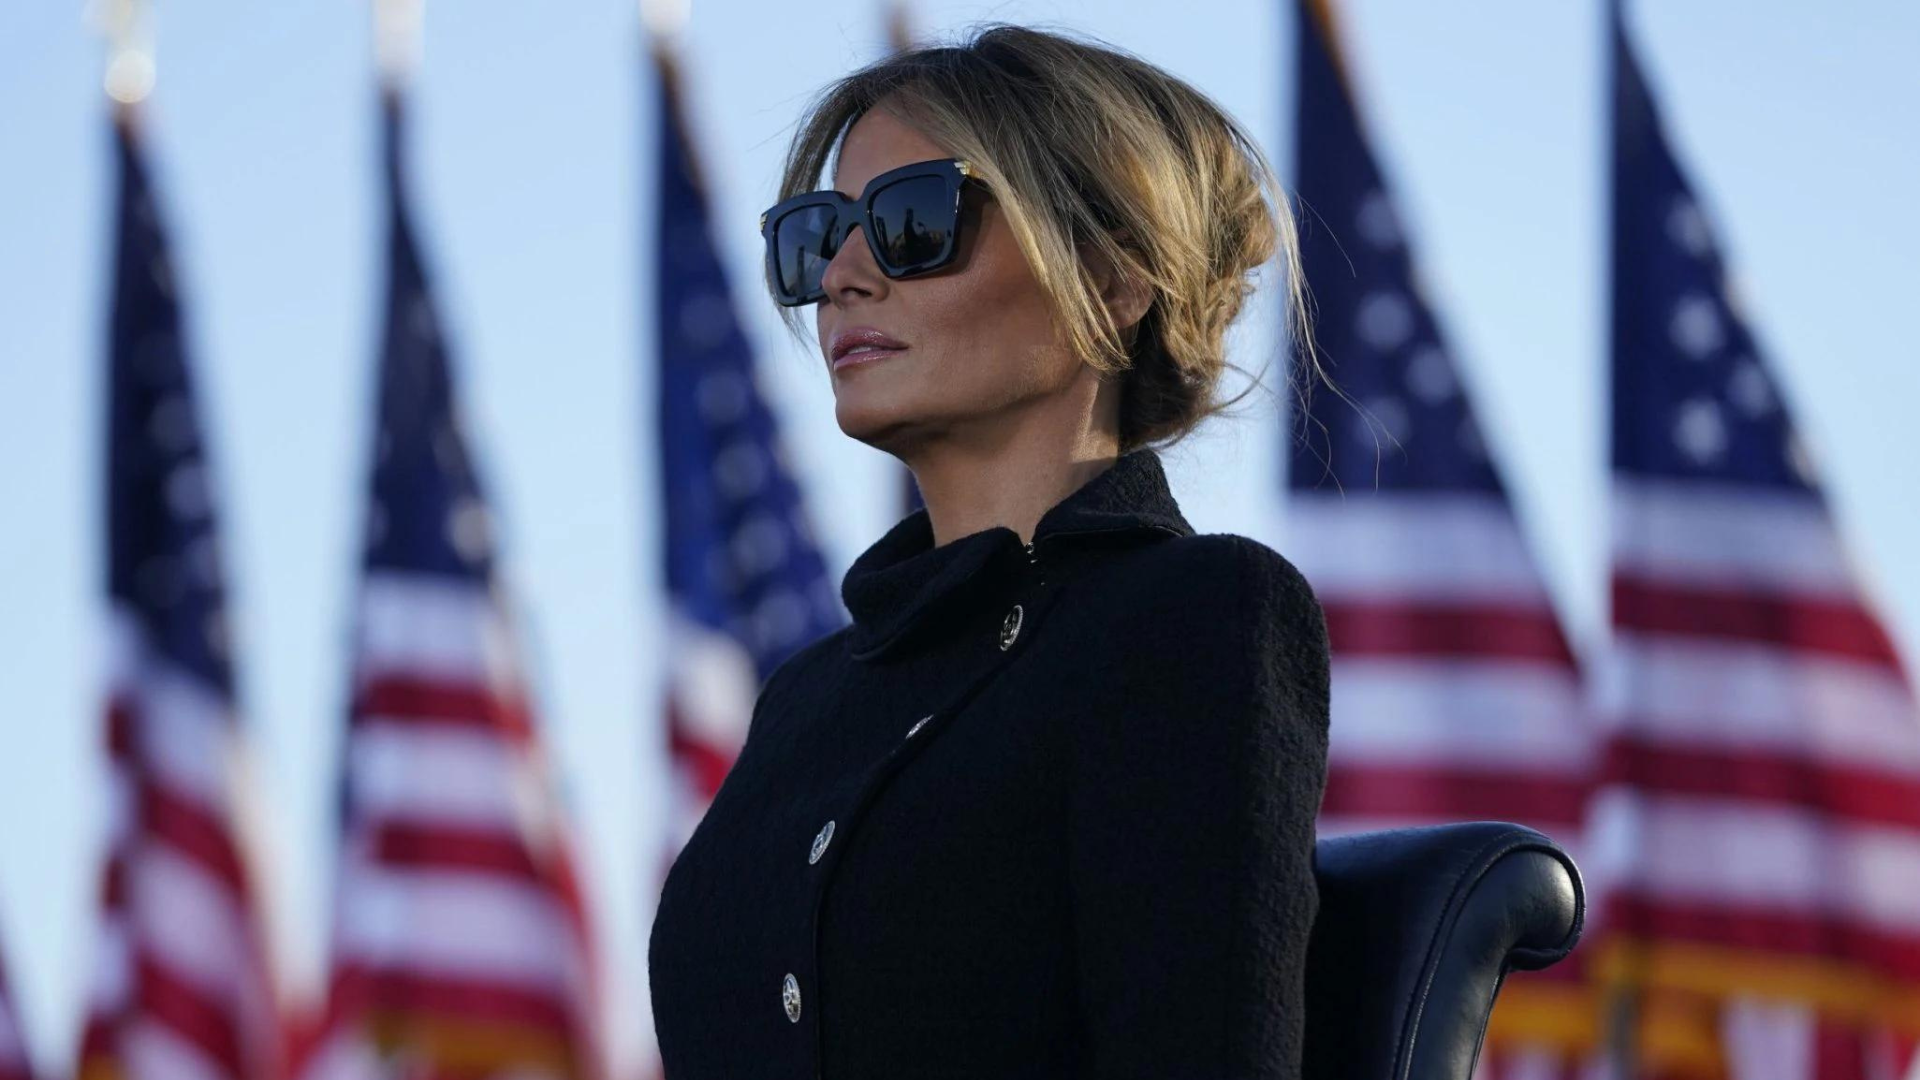 Trump NFT comeback: Melania releases ‘The 1776 Collection’ just months after Donald’s NFT trading card debacle